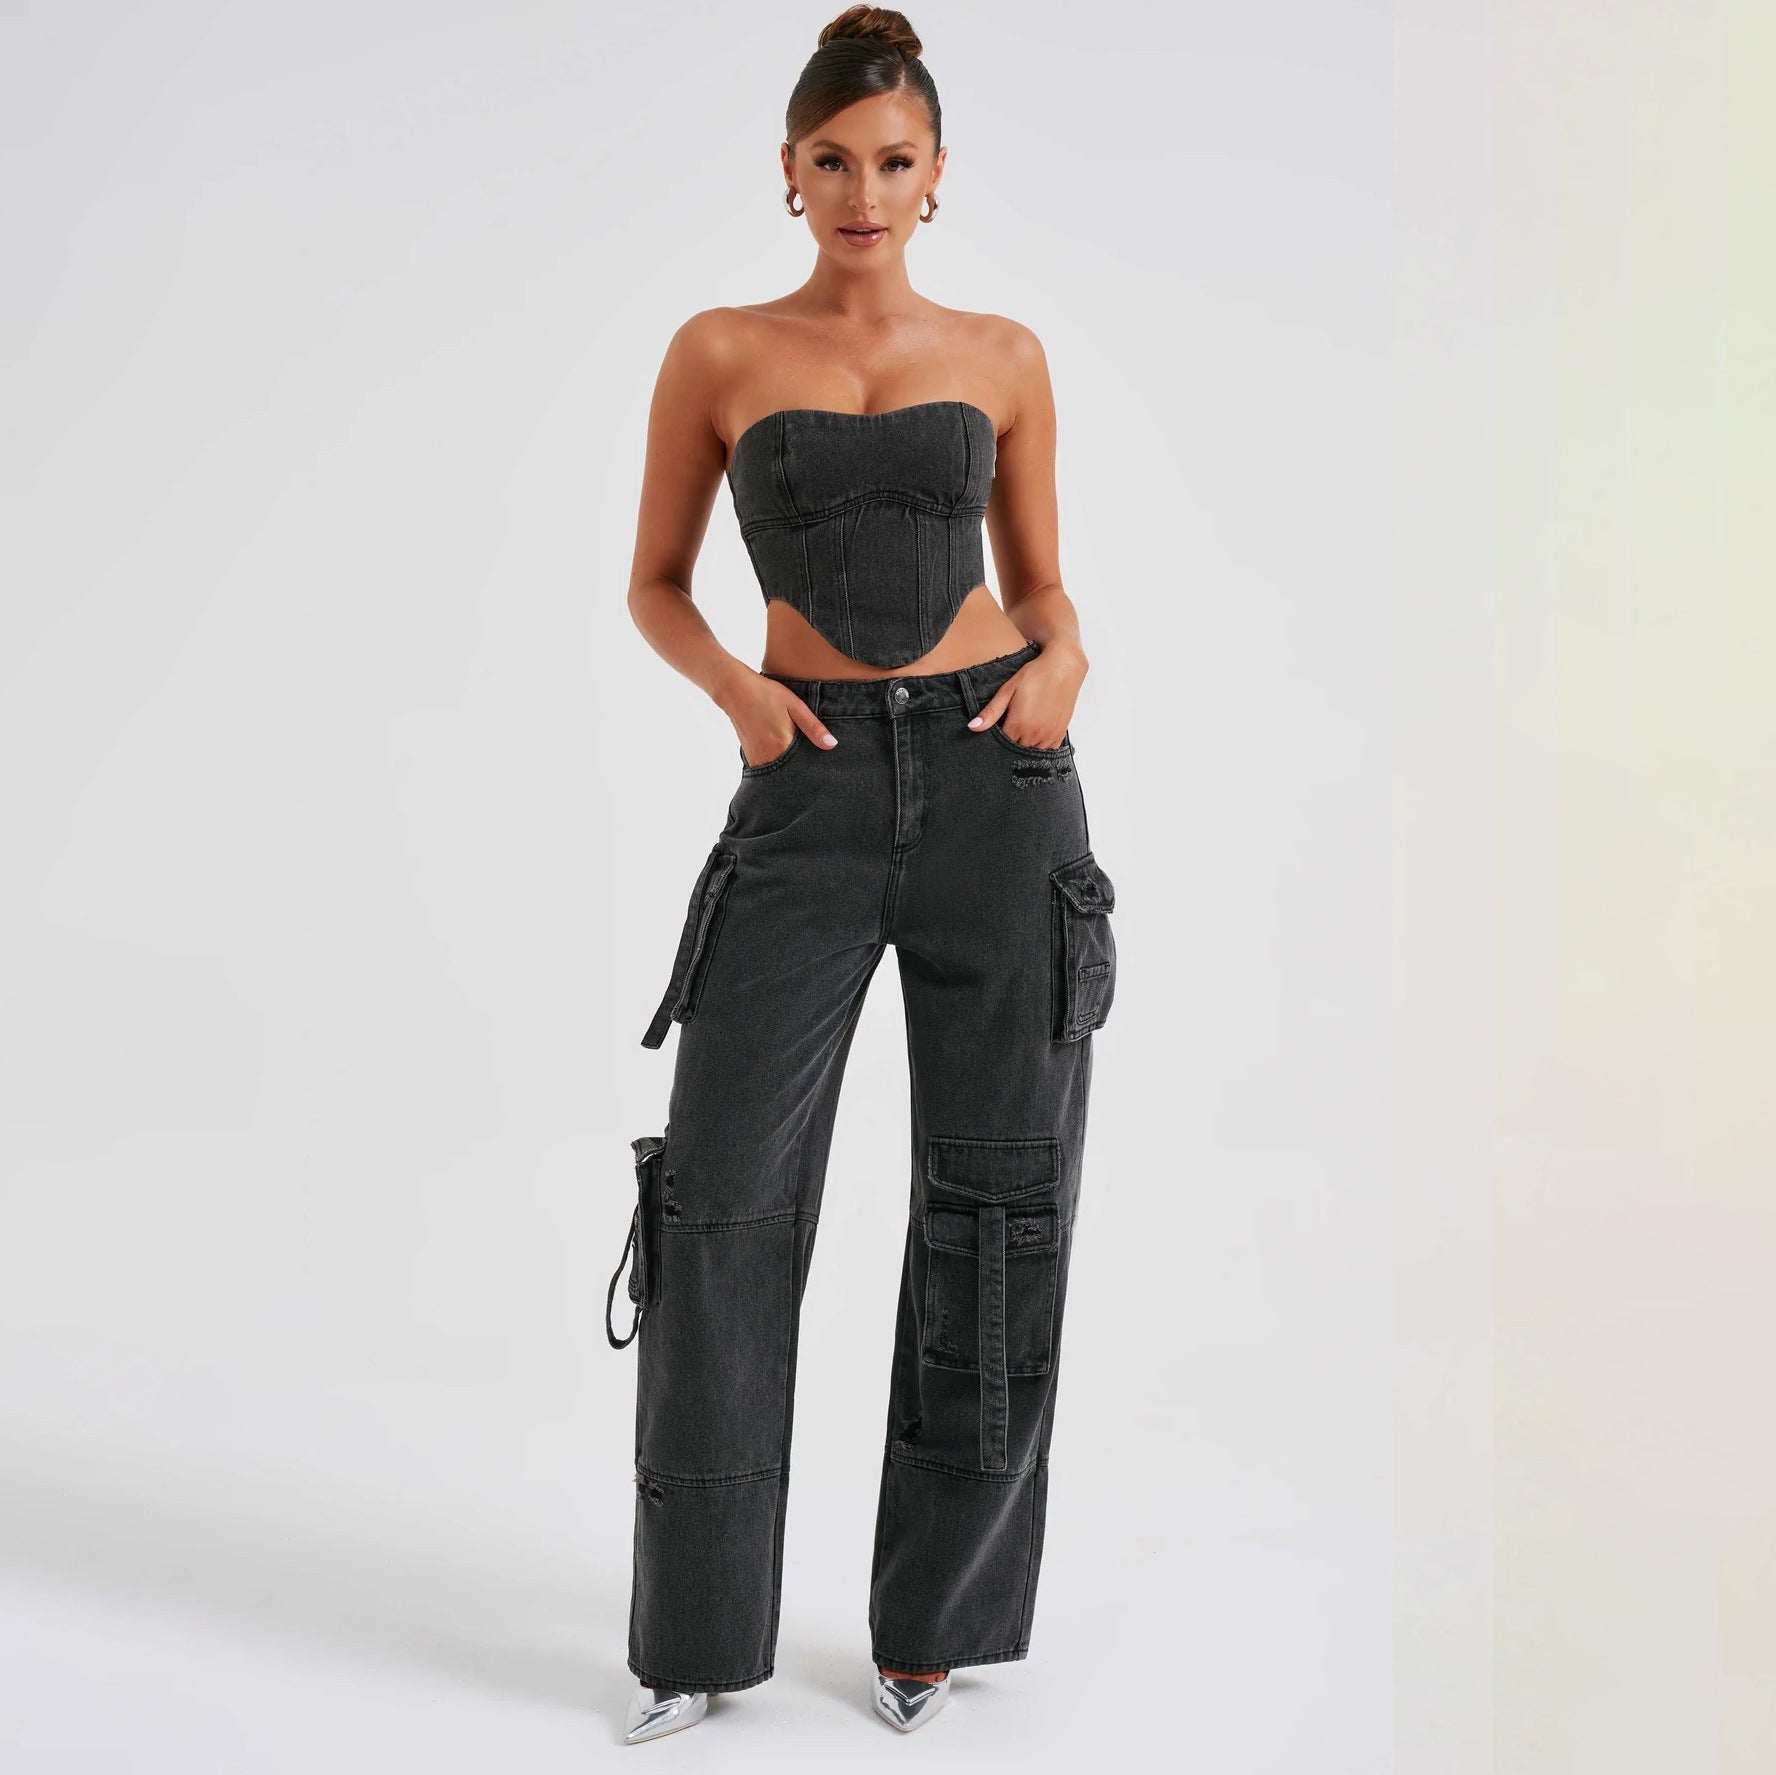 Stylish Low Waist Tube Top and Pocket Stitching Jeans for Women